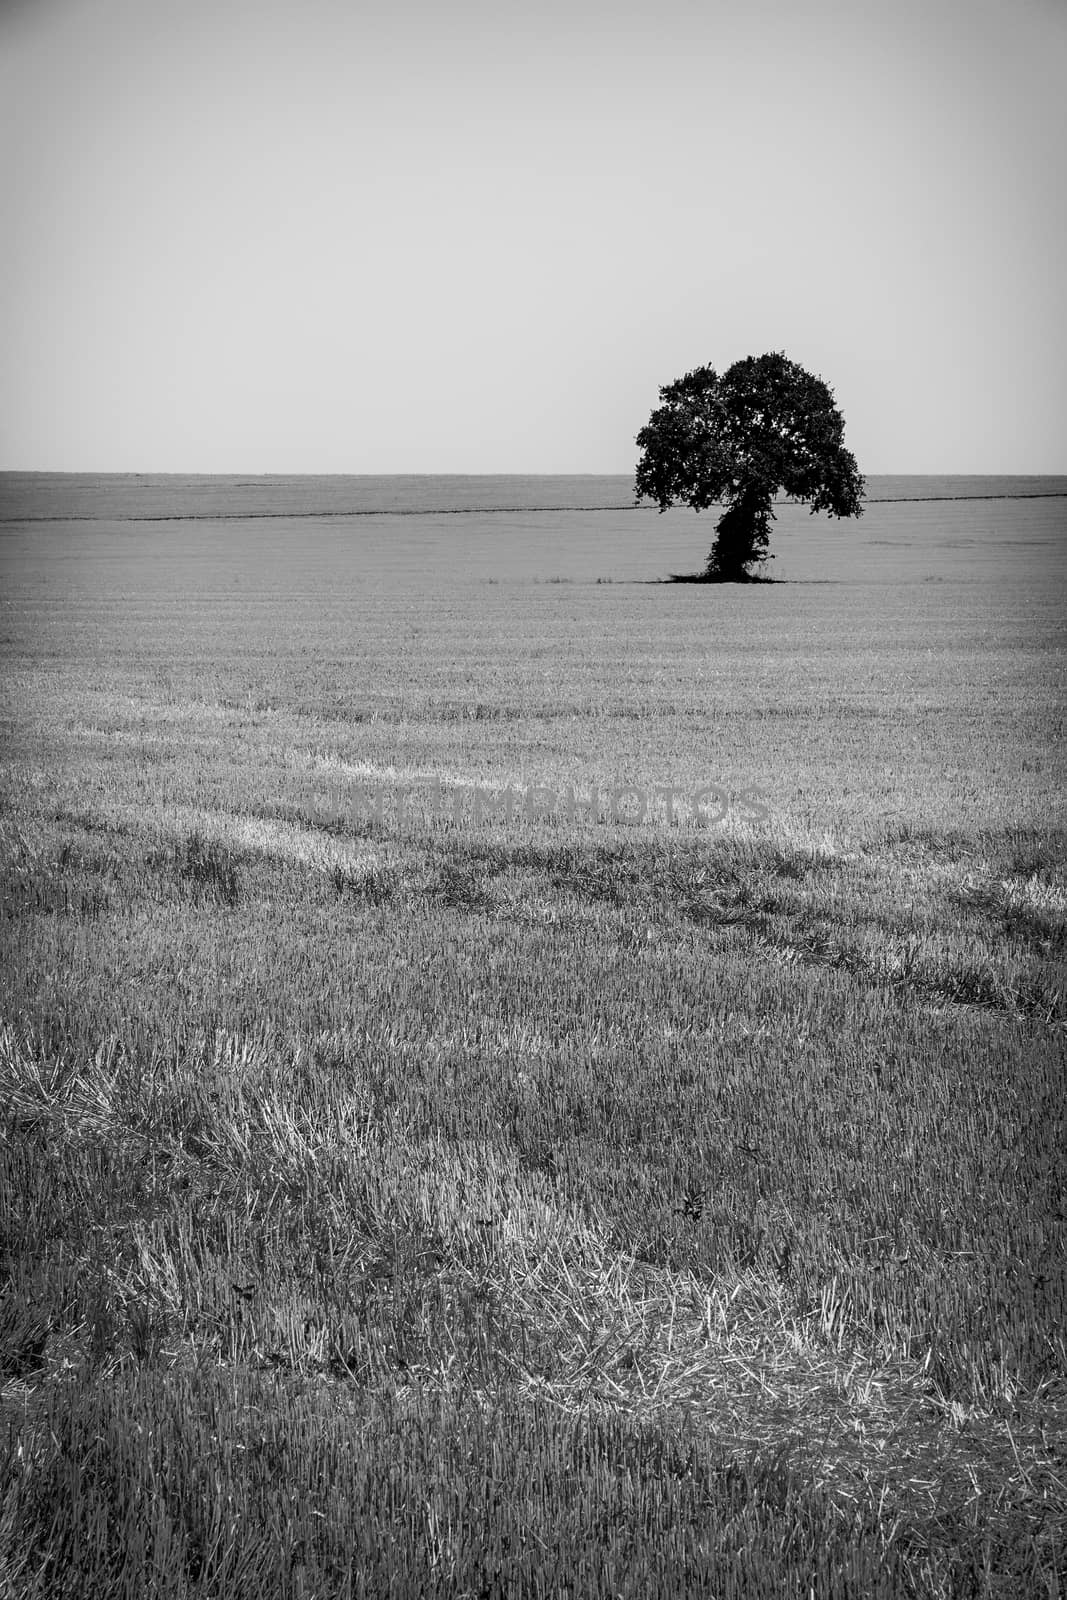 Black and white image of a lonely tree on a harvest wheat field